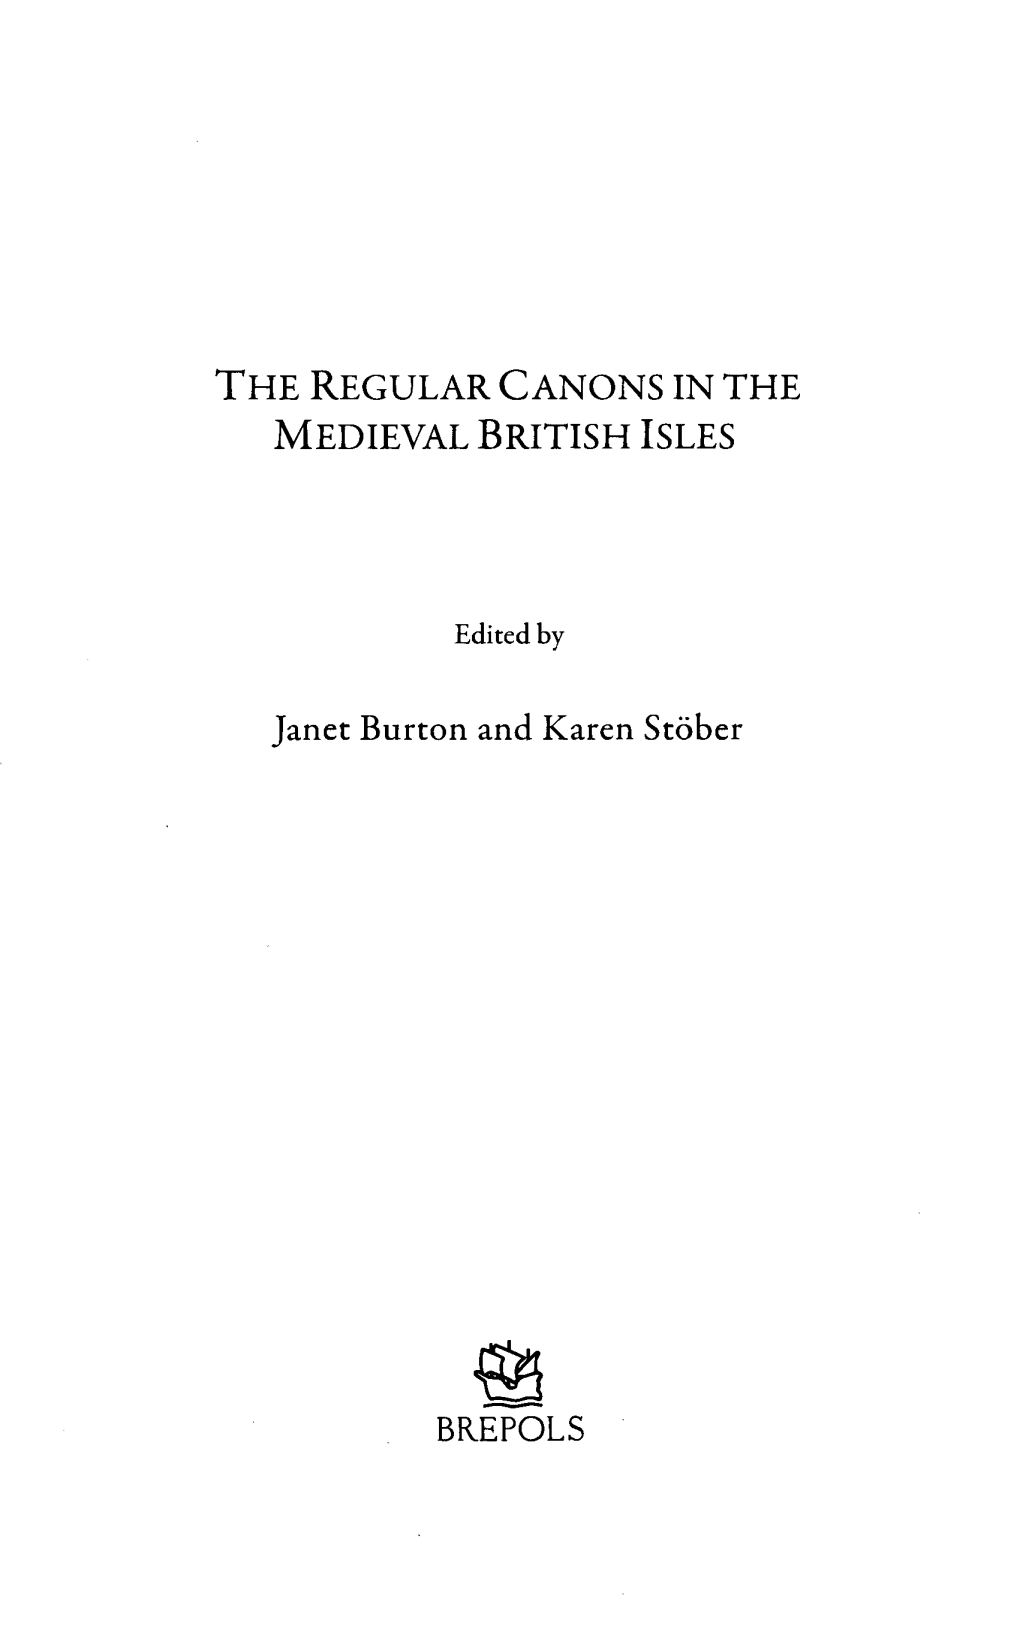 THE REGULAR CANONS in the MEDIEVAL BRITISH ISLES A